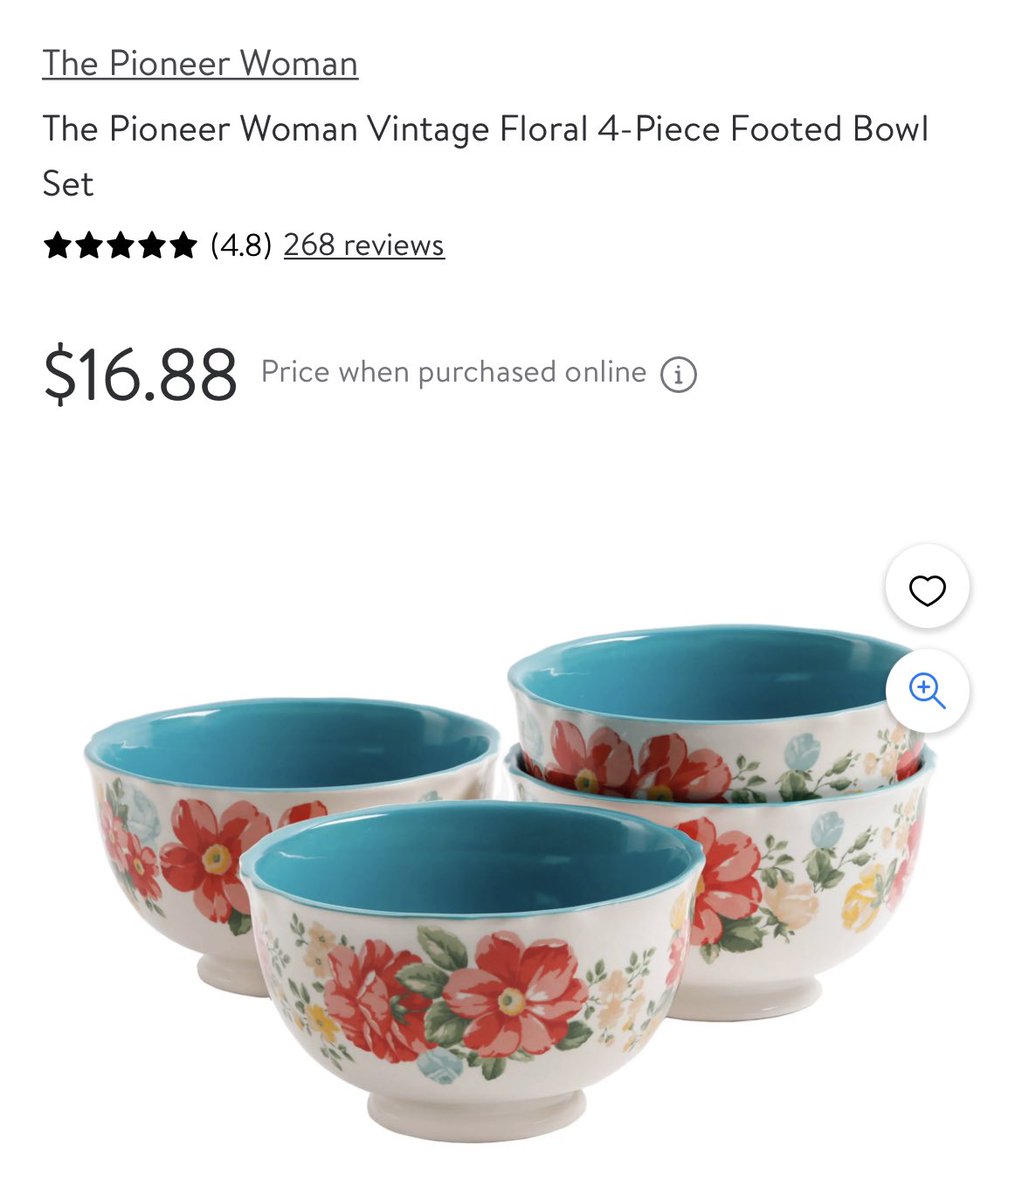 You may be audacious, but are you “passing off a set of bowls from Walmart as handmade antiques at an over 700% markup on Etsy” audacious?